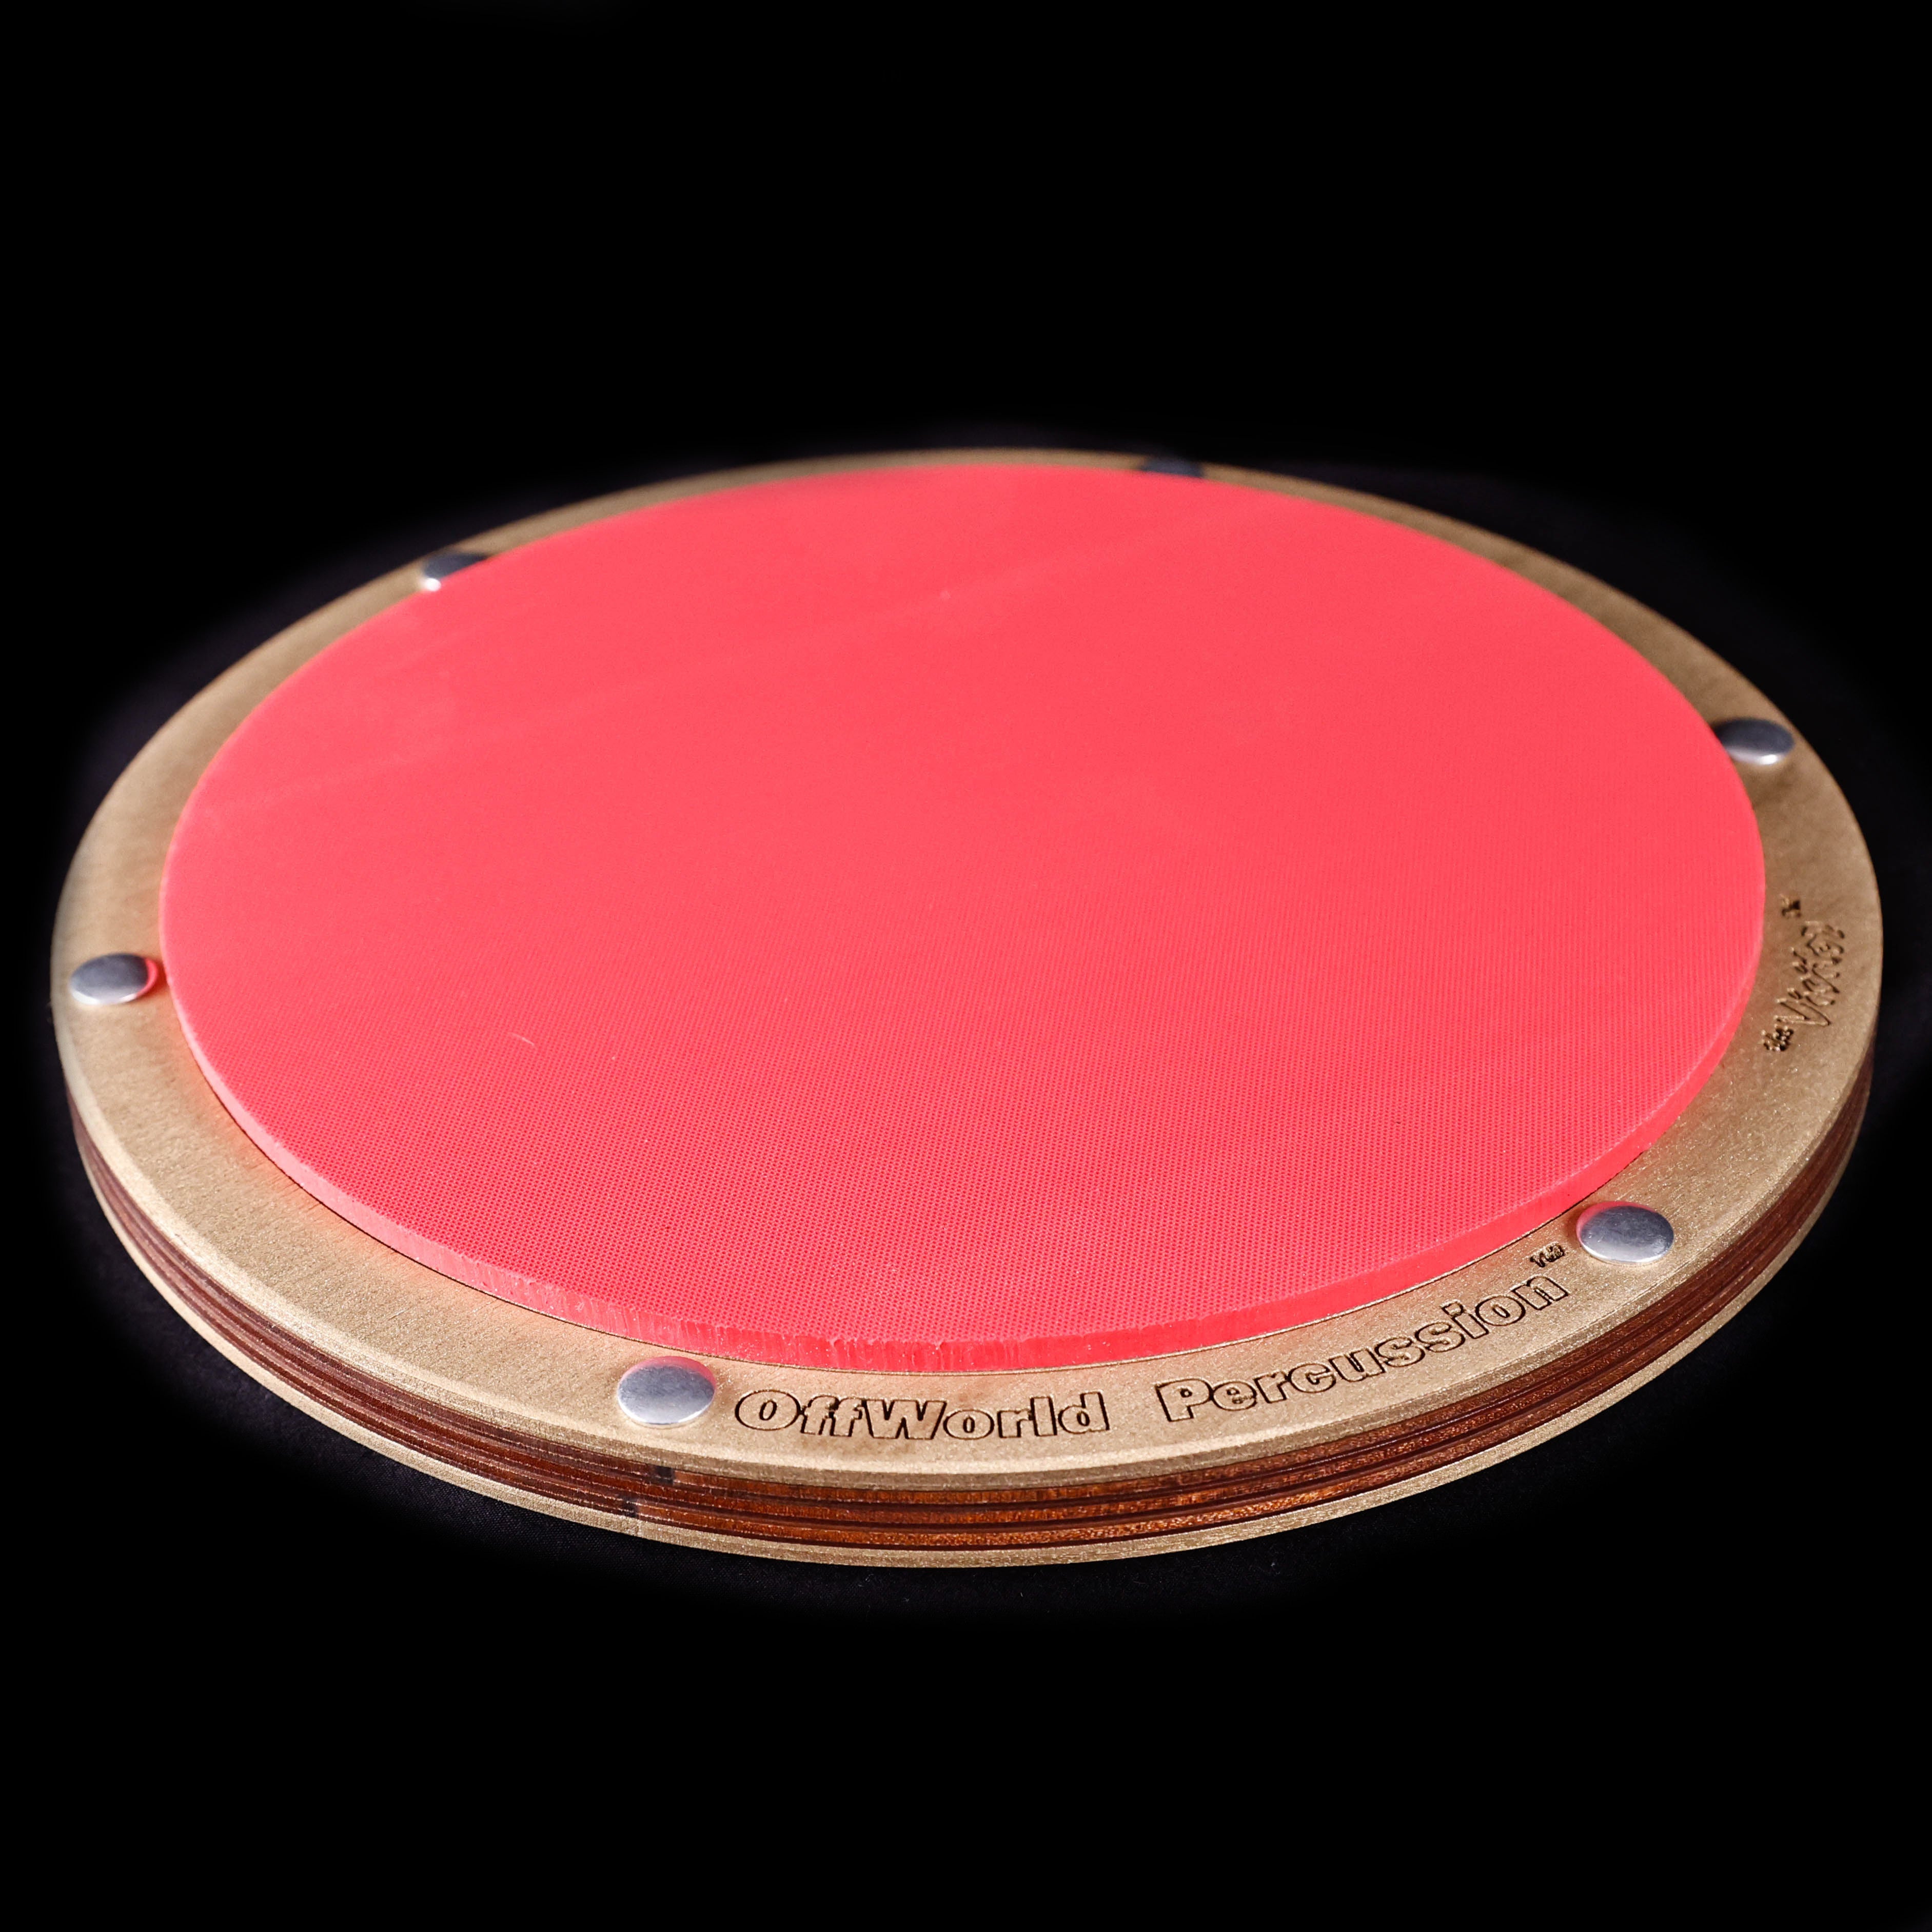 Offworld Percussion Visitor 9" Practice Pad, Red